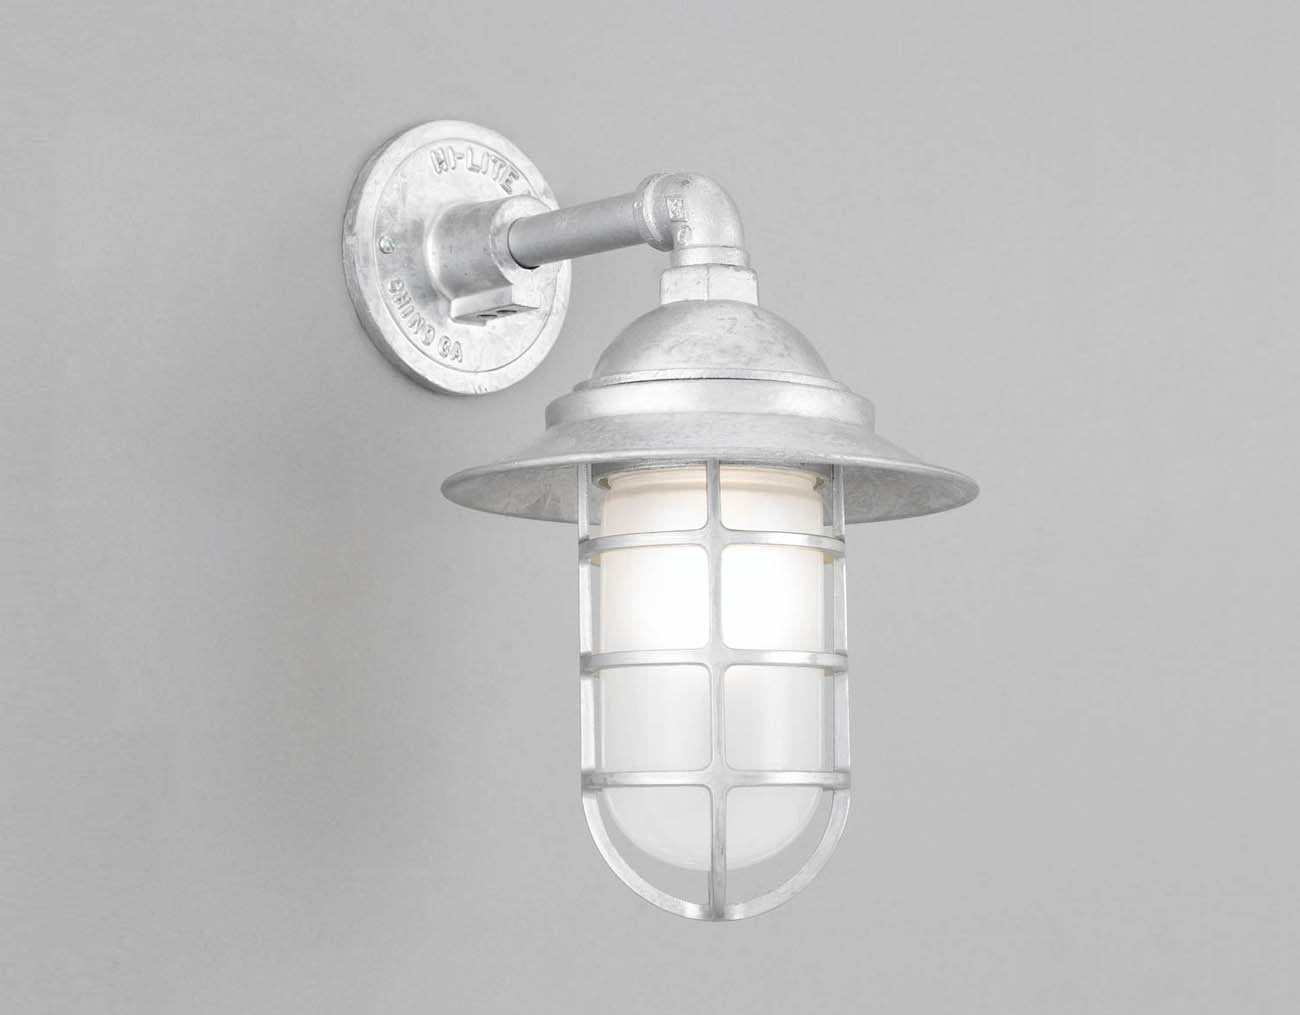 Hi-Lite Angle Vapor Tight Jar Sconce - Galvvanized/Standard (shown with frosted glass and 8" shade)